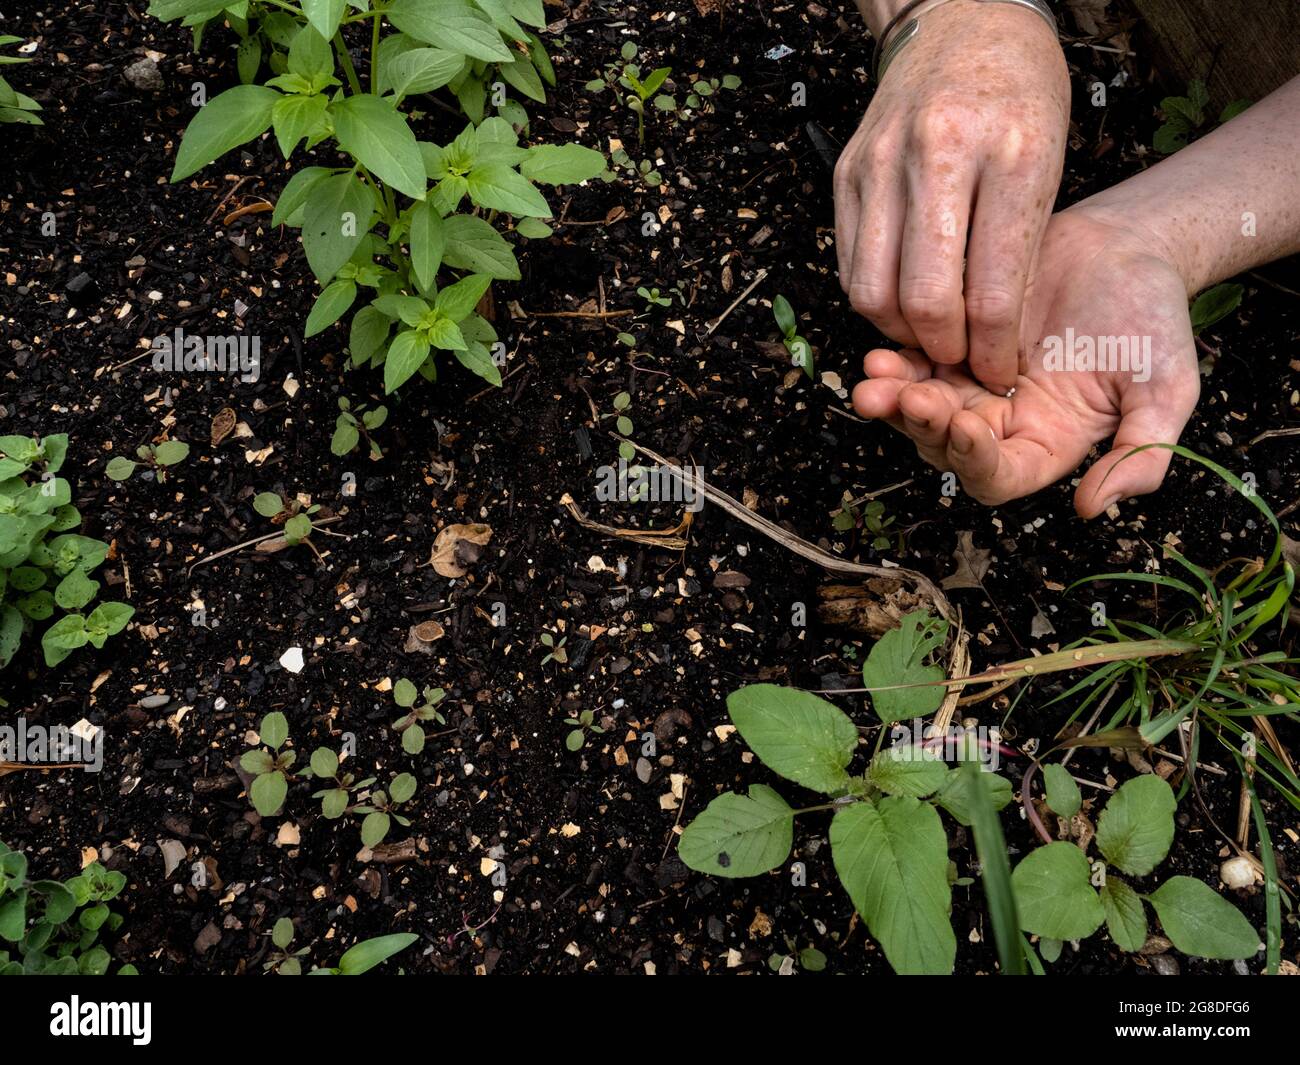 North America - United States, New York City: Planting seeds at the Halsey Community Garden located in Brooklyn. Stock Photo